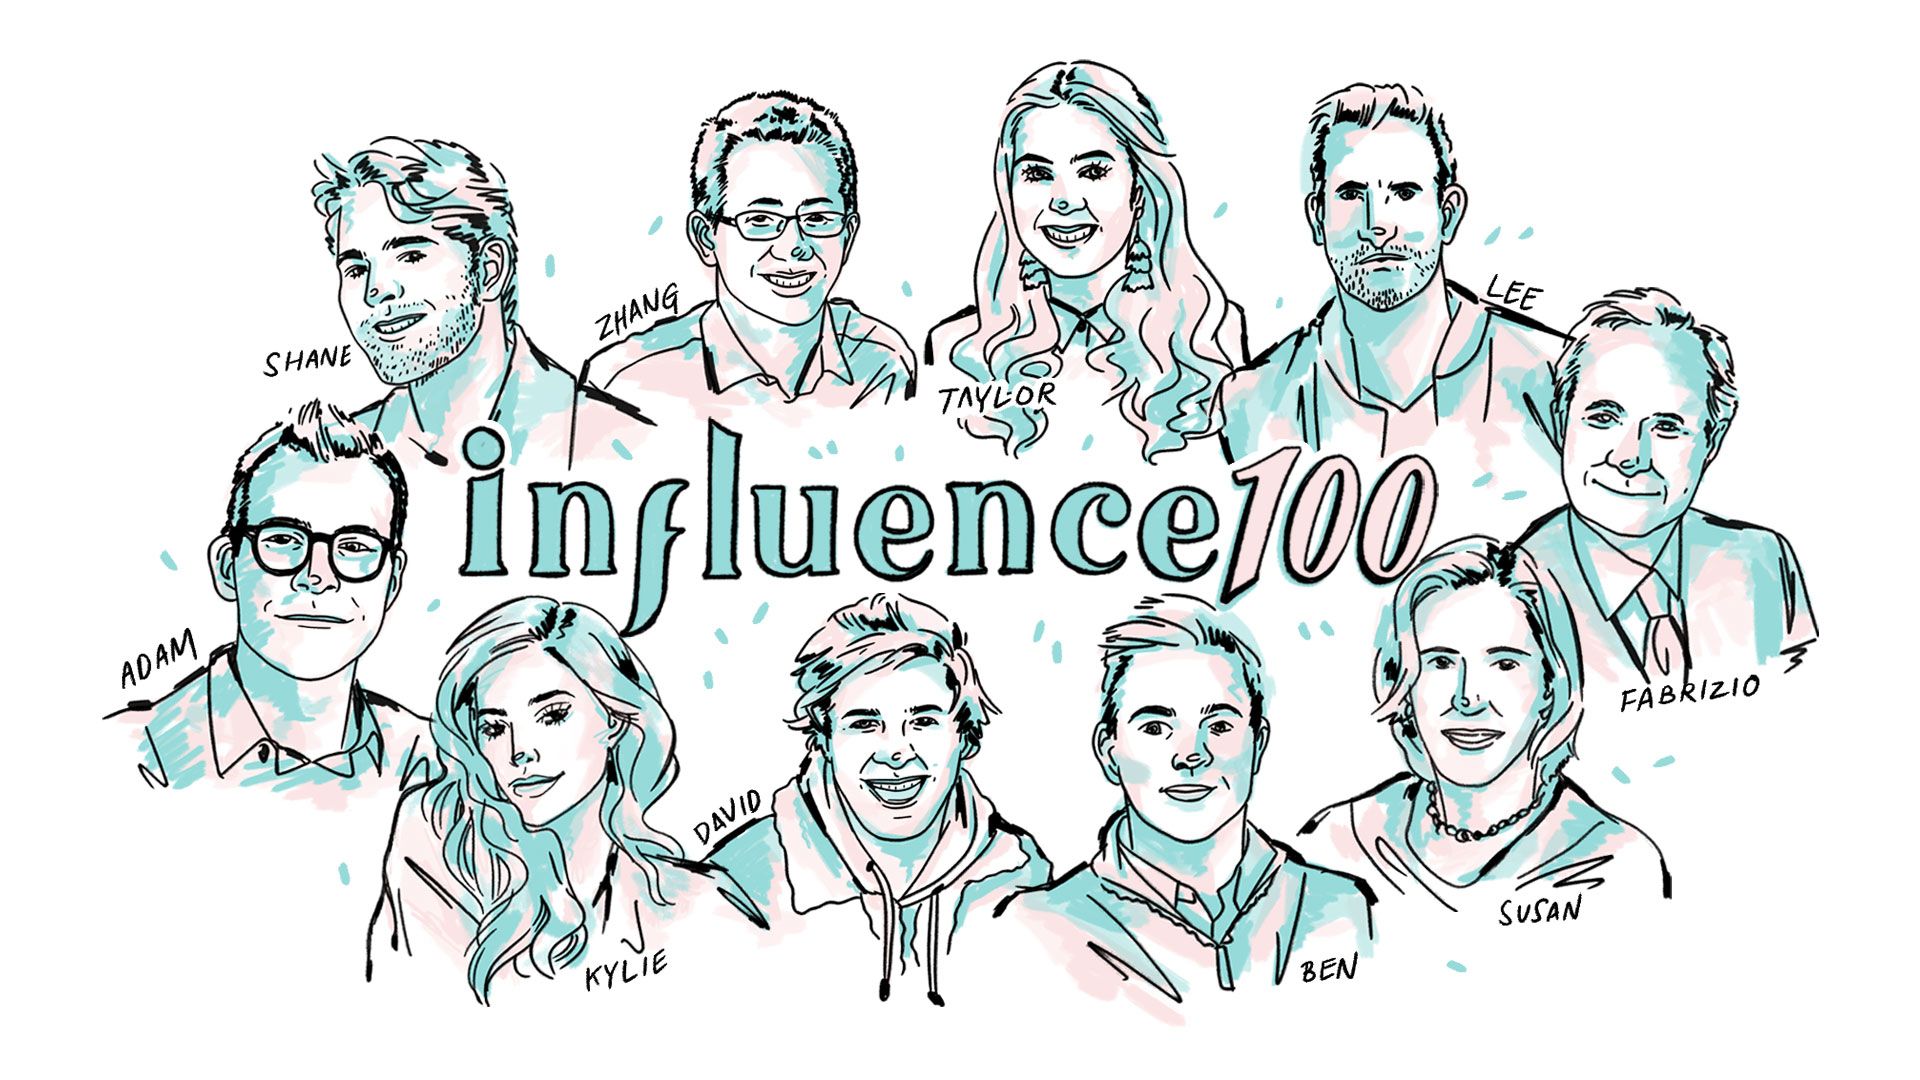 Announcing Influence 100